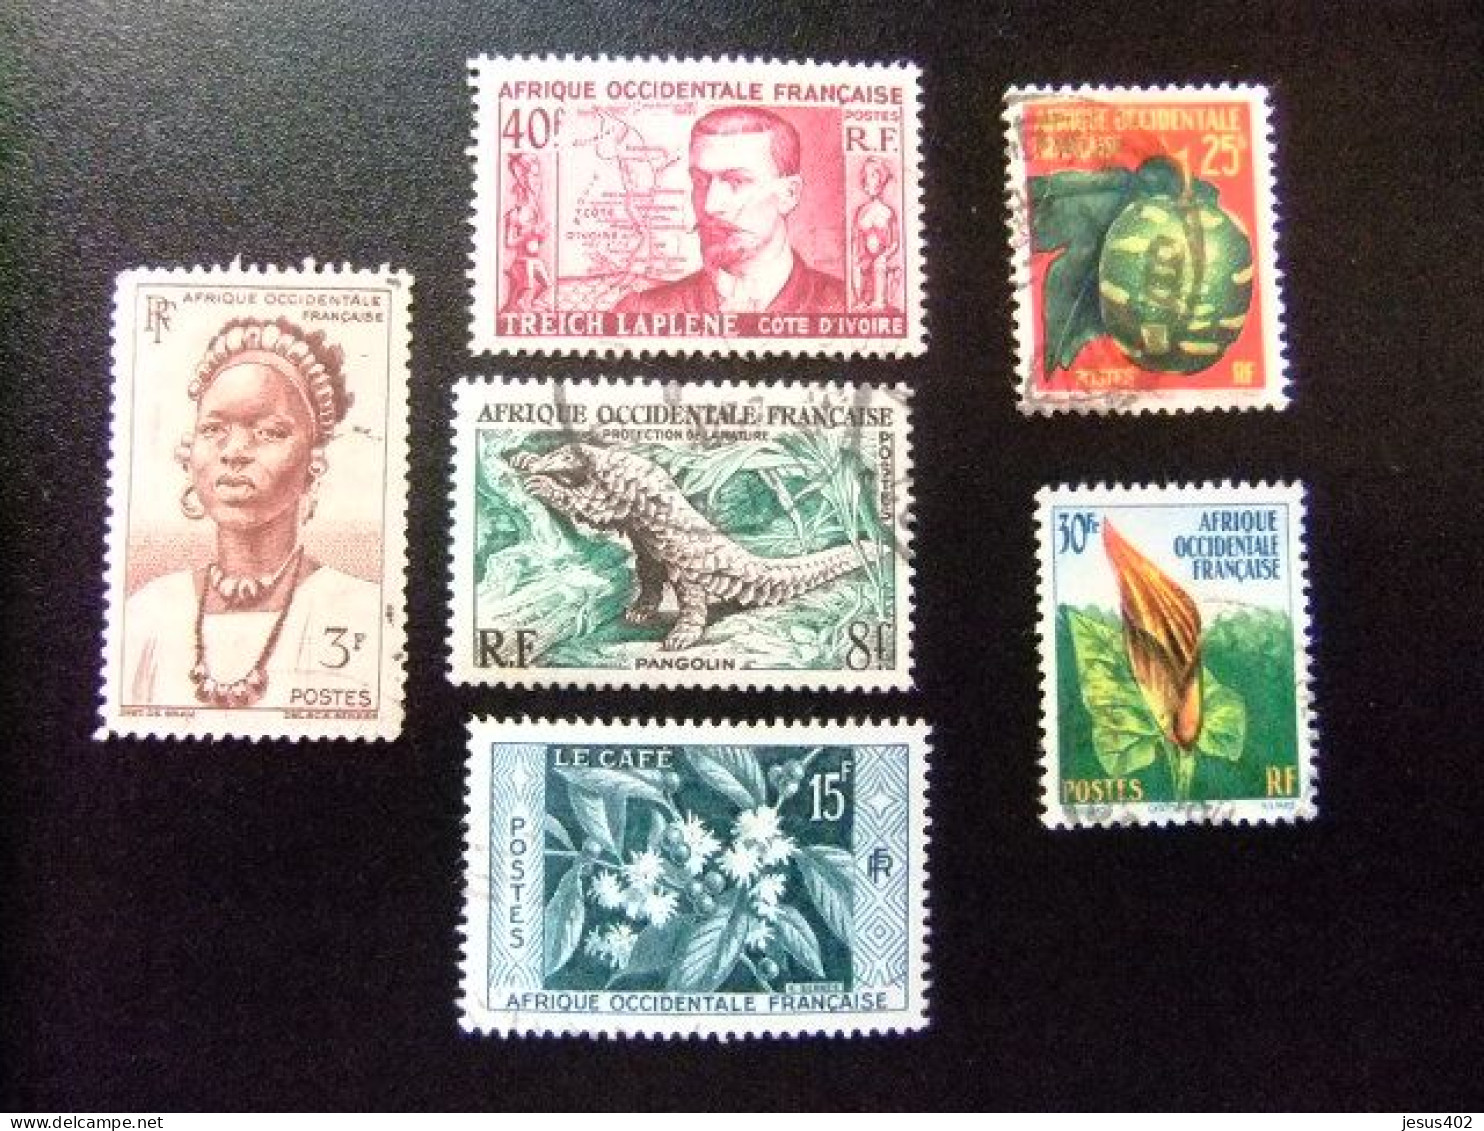 56 AFRIQUE OCCIDENTALE FRANCAISE (A.O.F.) / PEQUEÑO LOTE SELLOS / YVERT 34+52+47+62+69+70 FU - Gebraucht